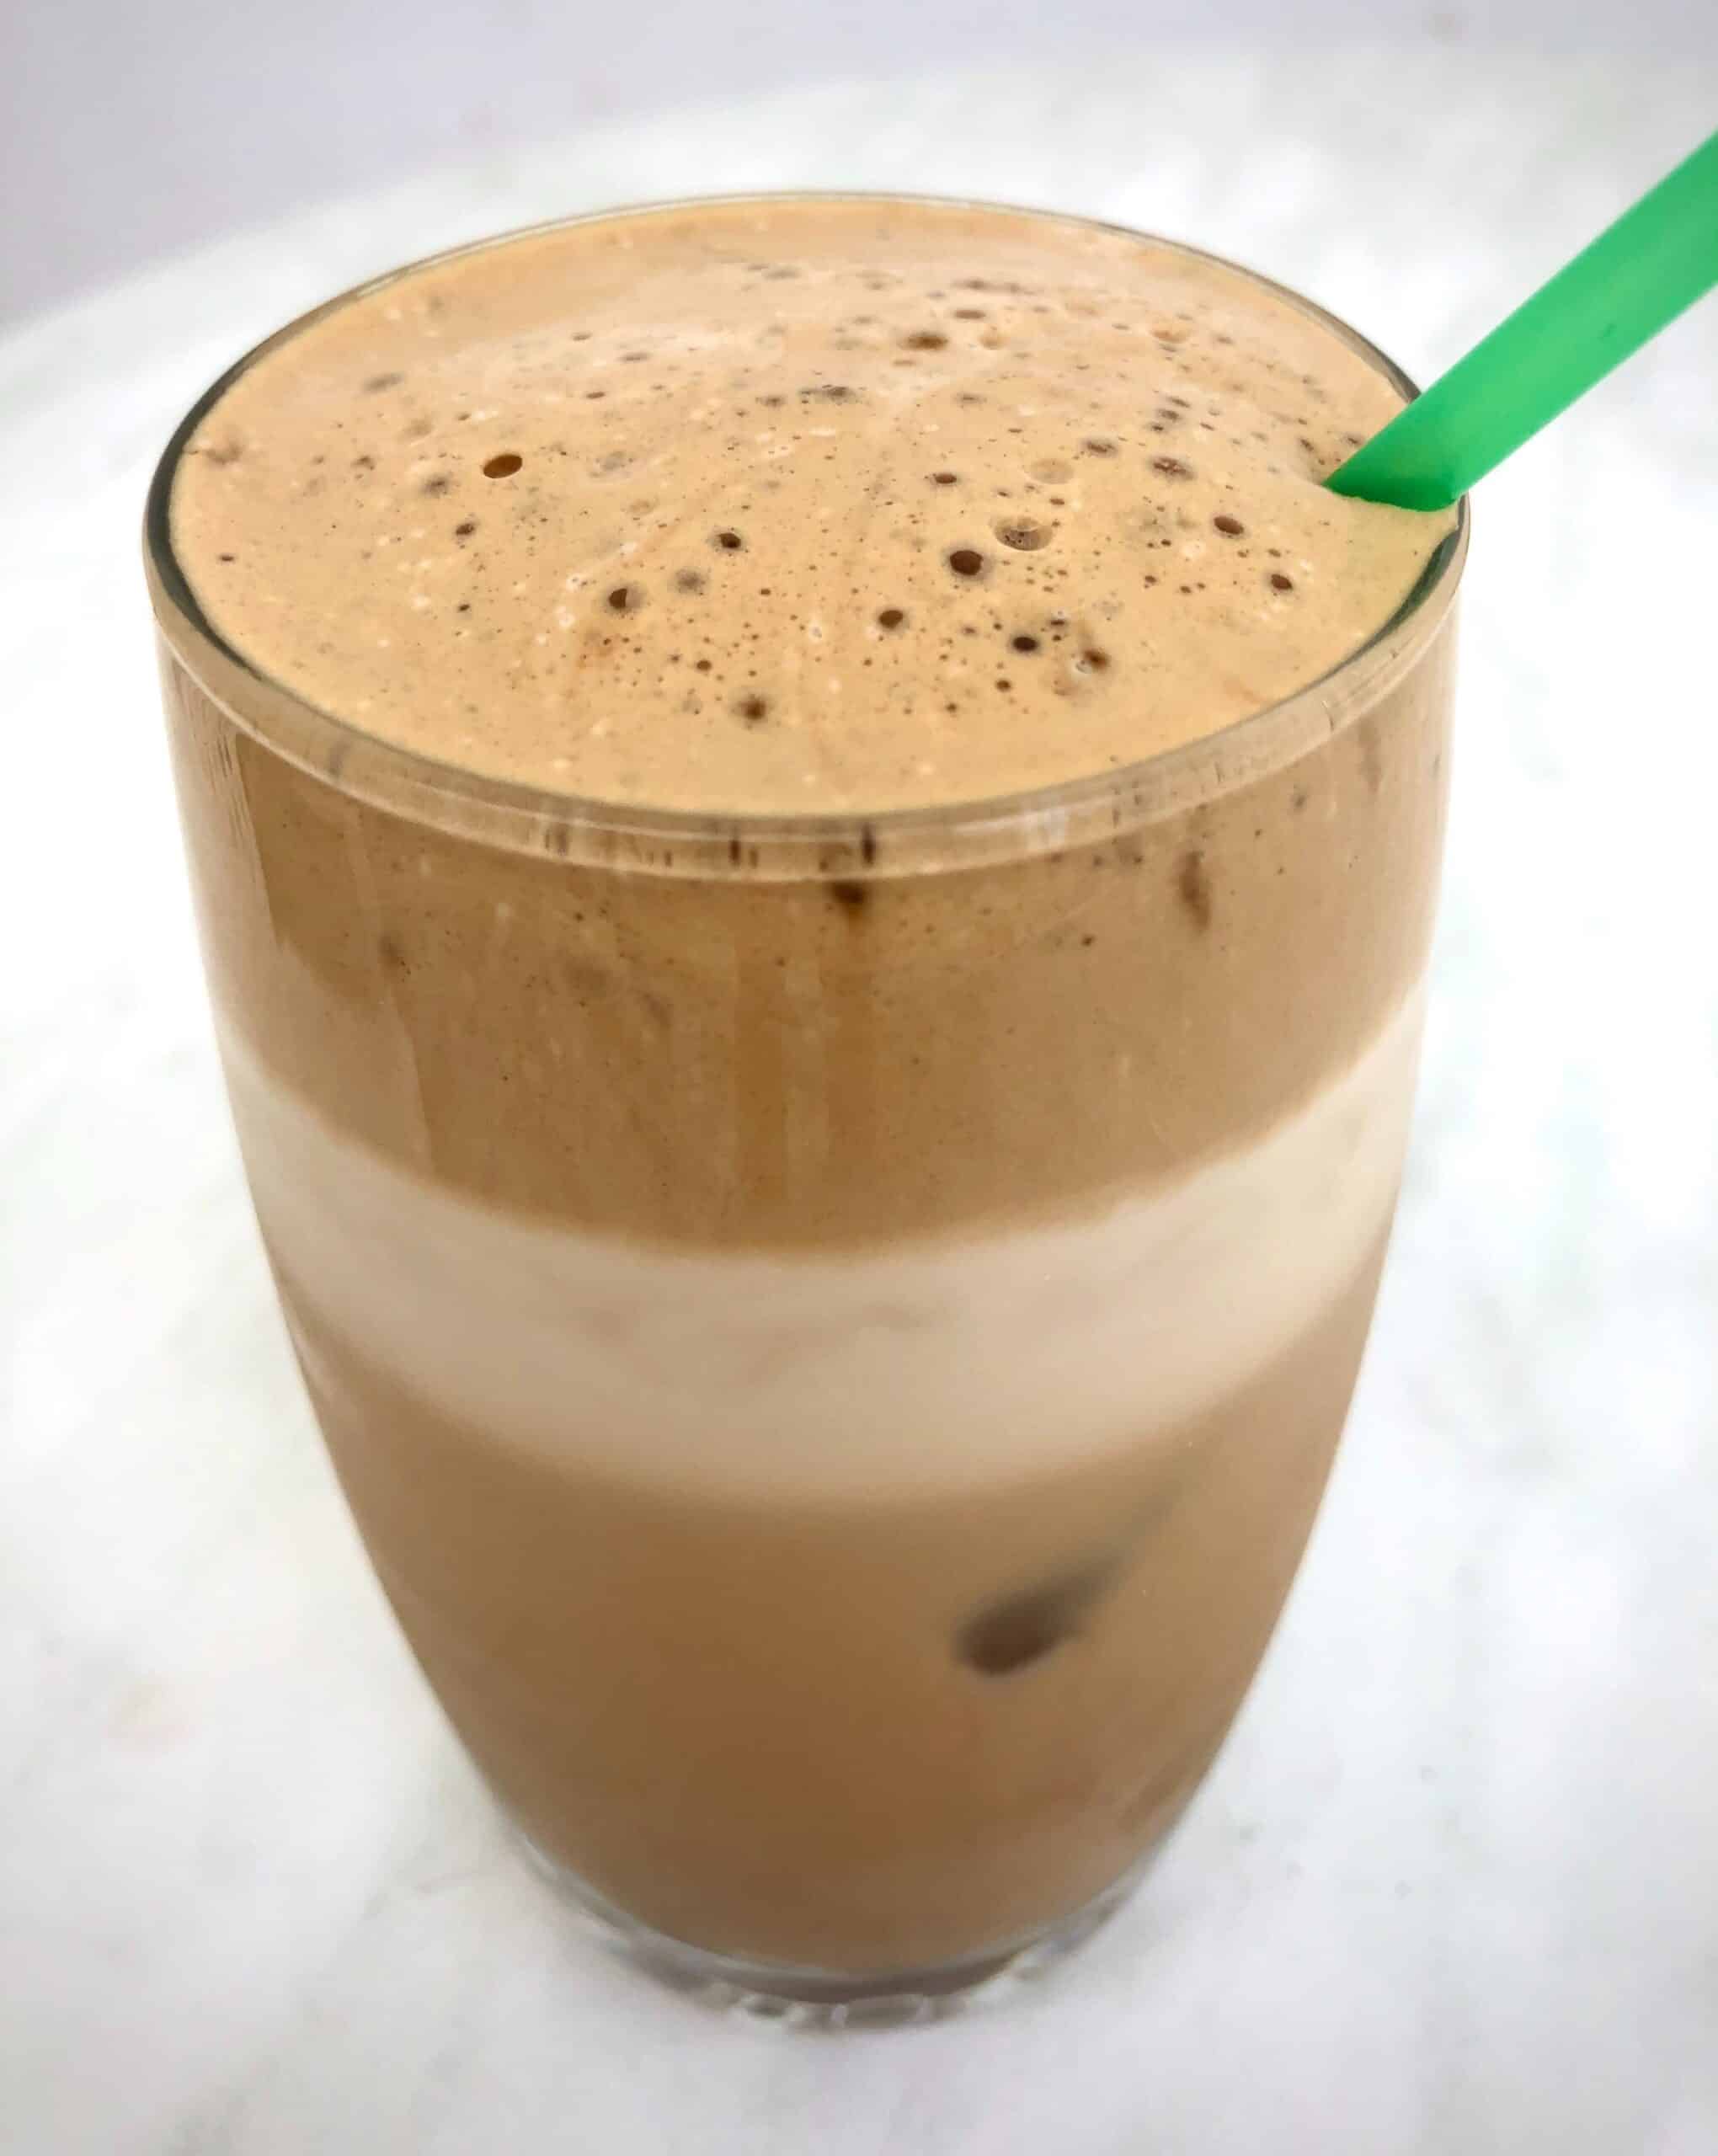 How to make the Best Greek Frappe coffee (Iced coffee) - My Greek Dish